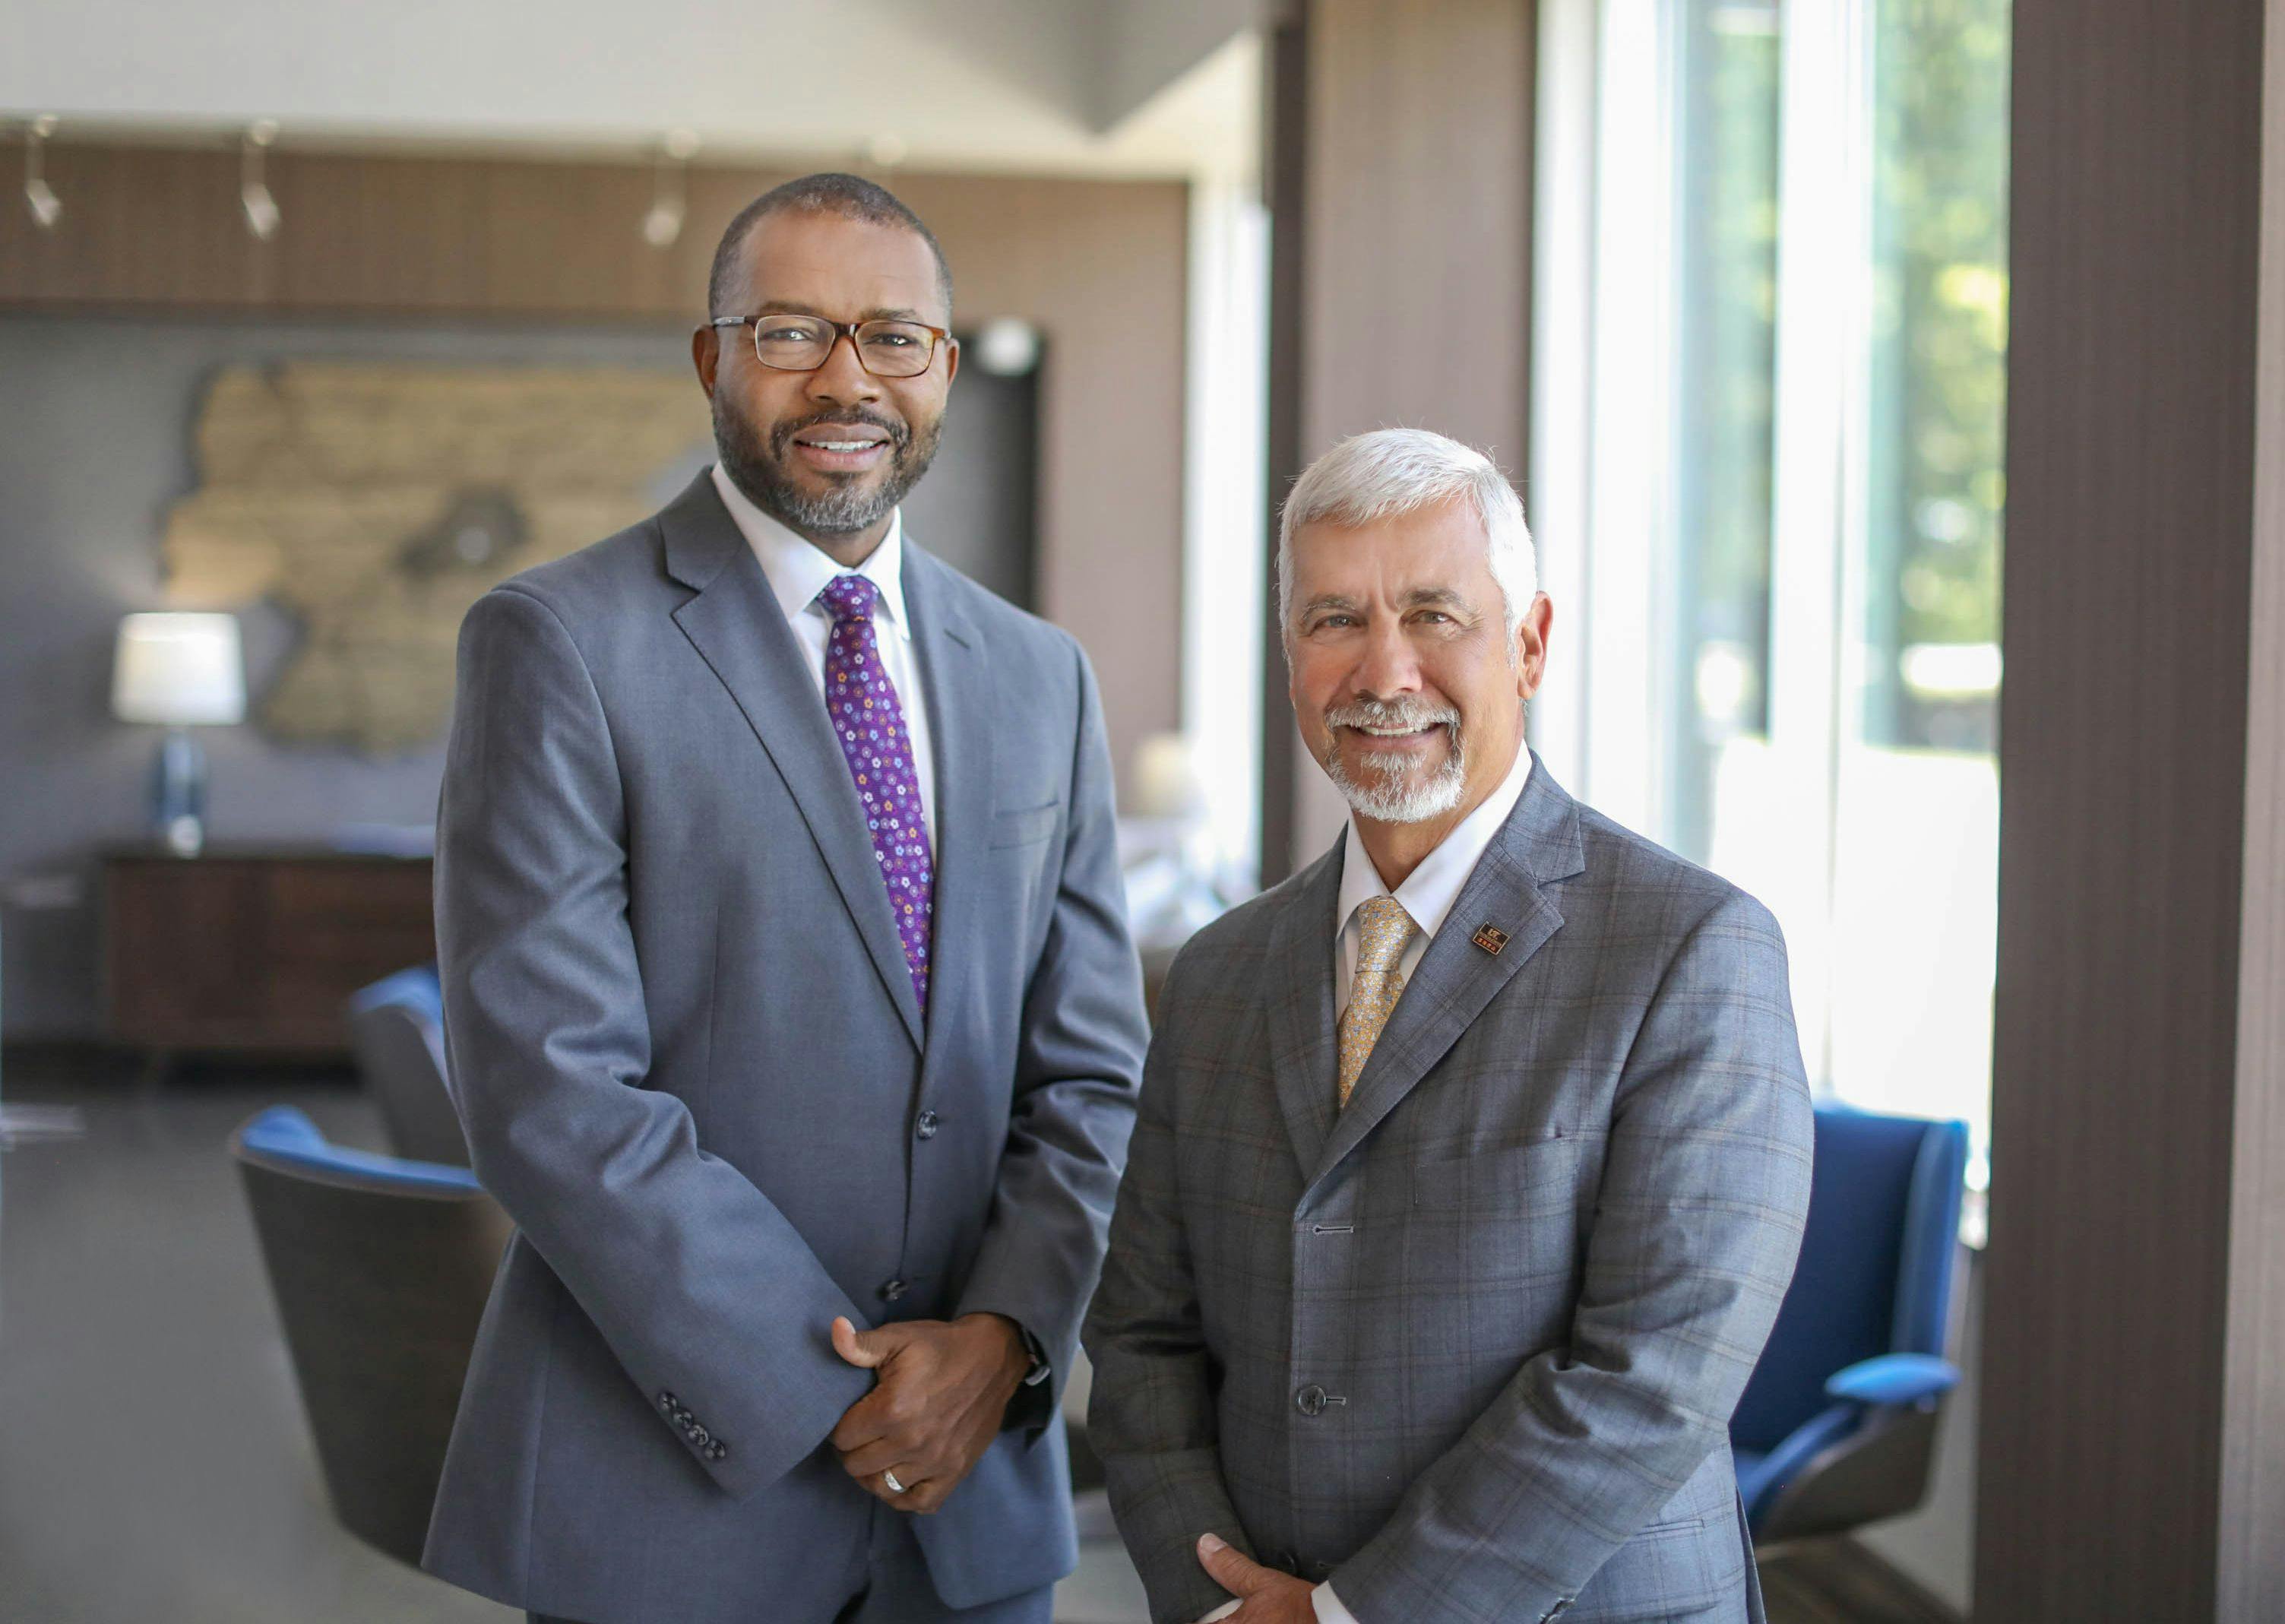 Keith Gray, left, will take over as CEO of The University of Tennessee Medical Center next year. Joe Landsman, CEO since 2005, plans to retire. (Photo: UTMC)